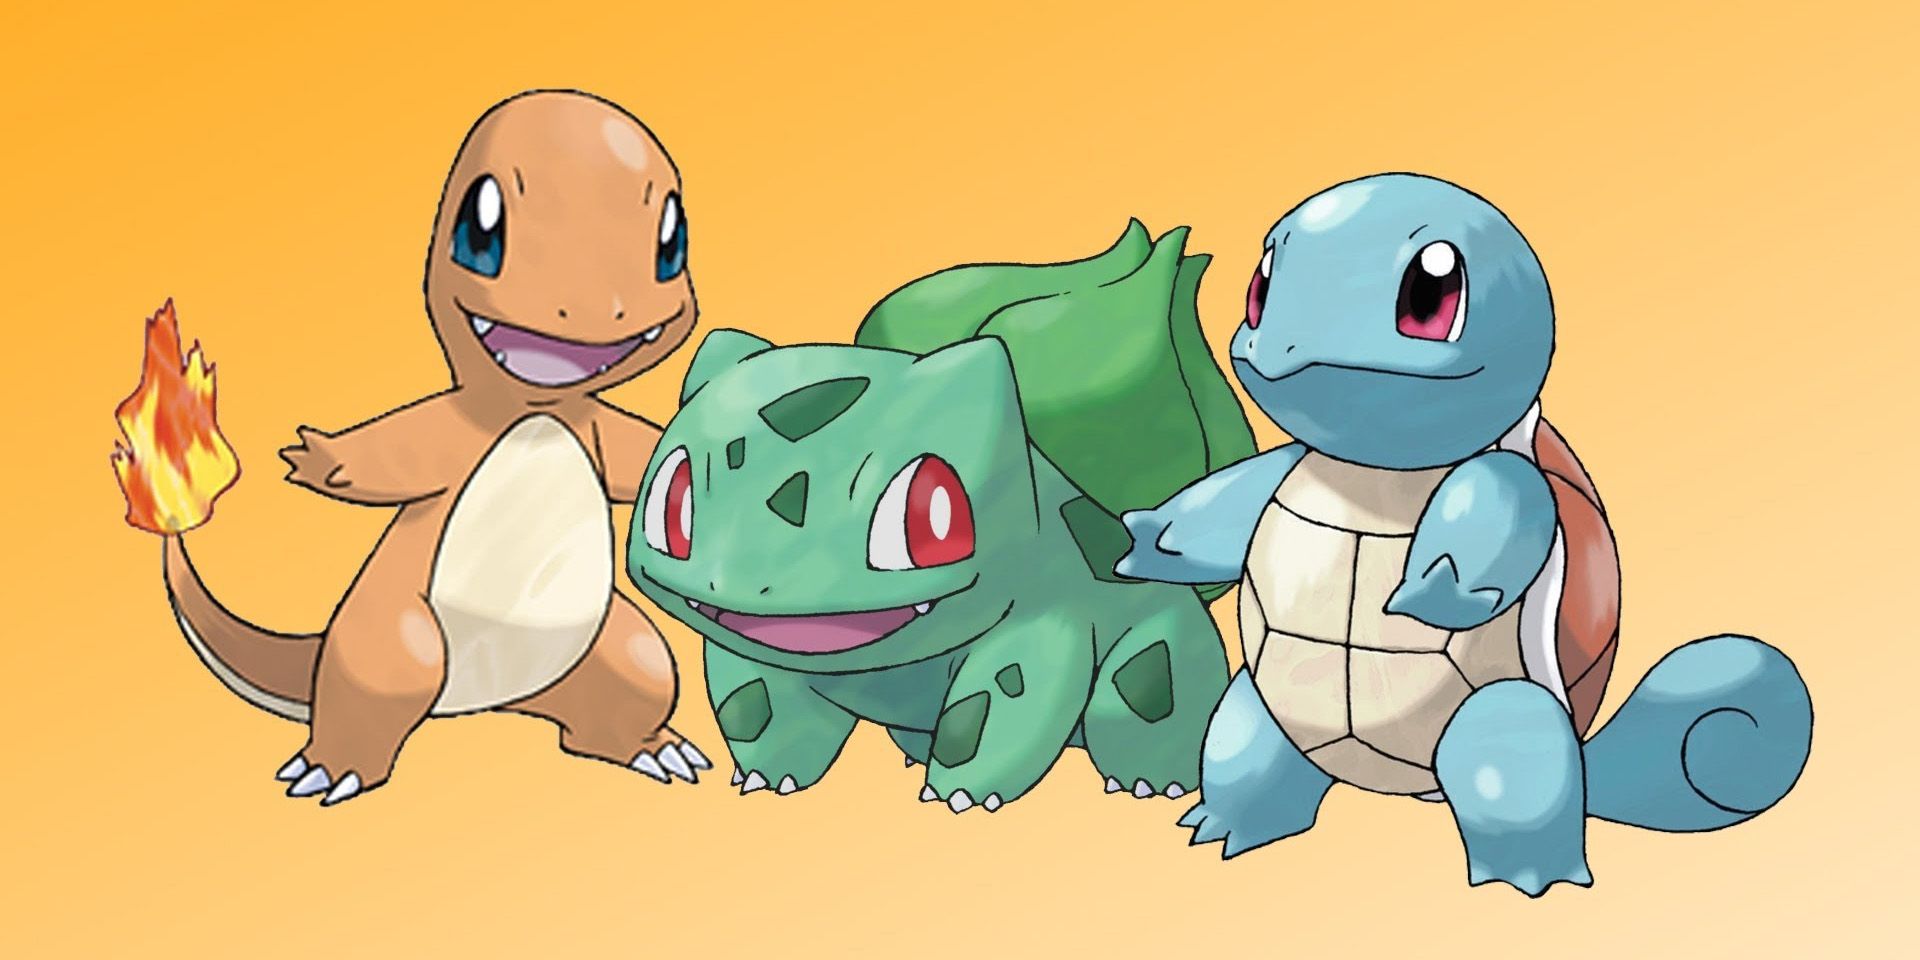 Charmander, Bulbasaur and Squirtle; the three starter Pokemon in Gen 1